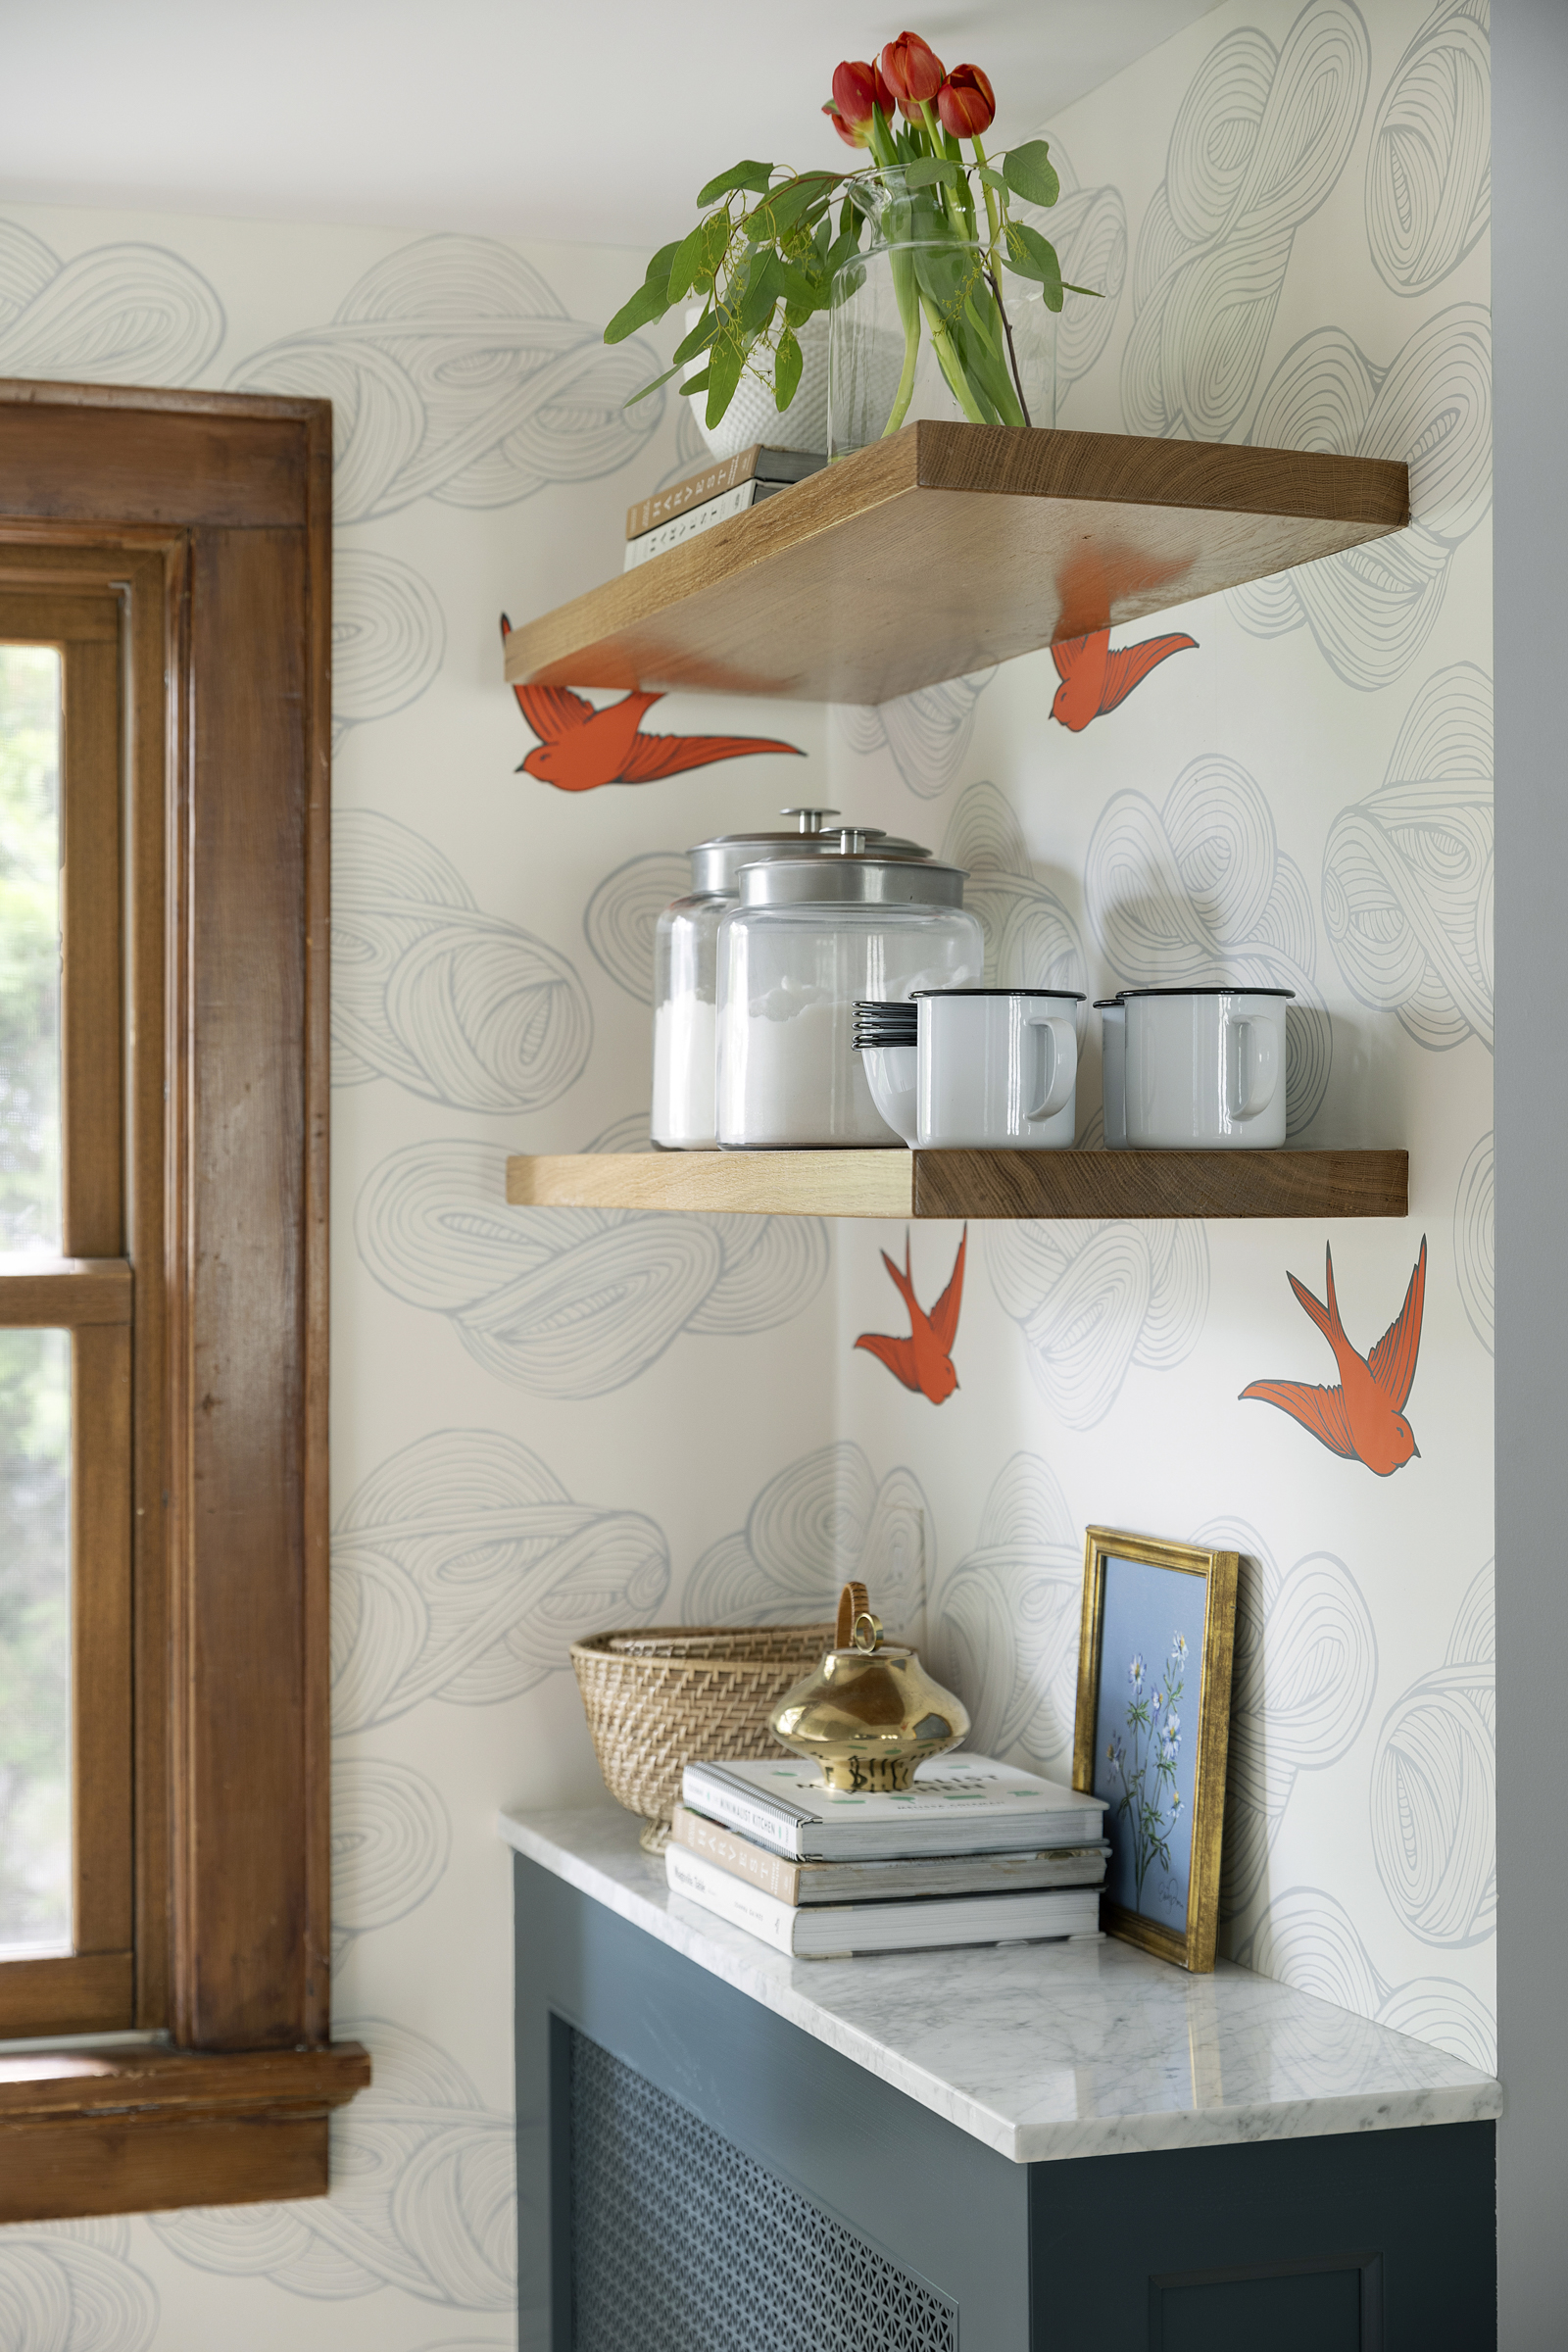 Cozy kitchen nook with custom blue radiator cover, orange bird wallpaper and wood shelving